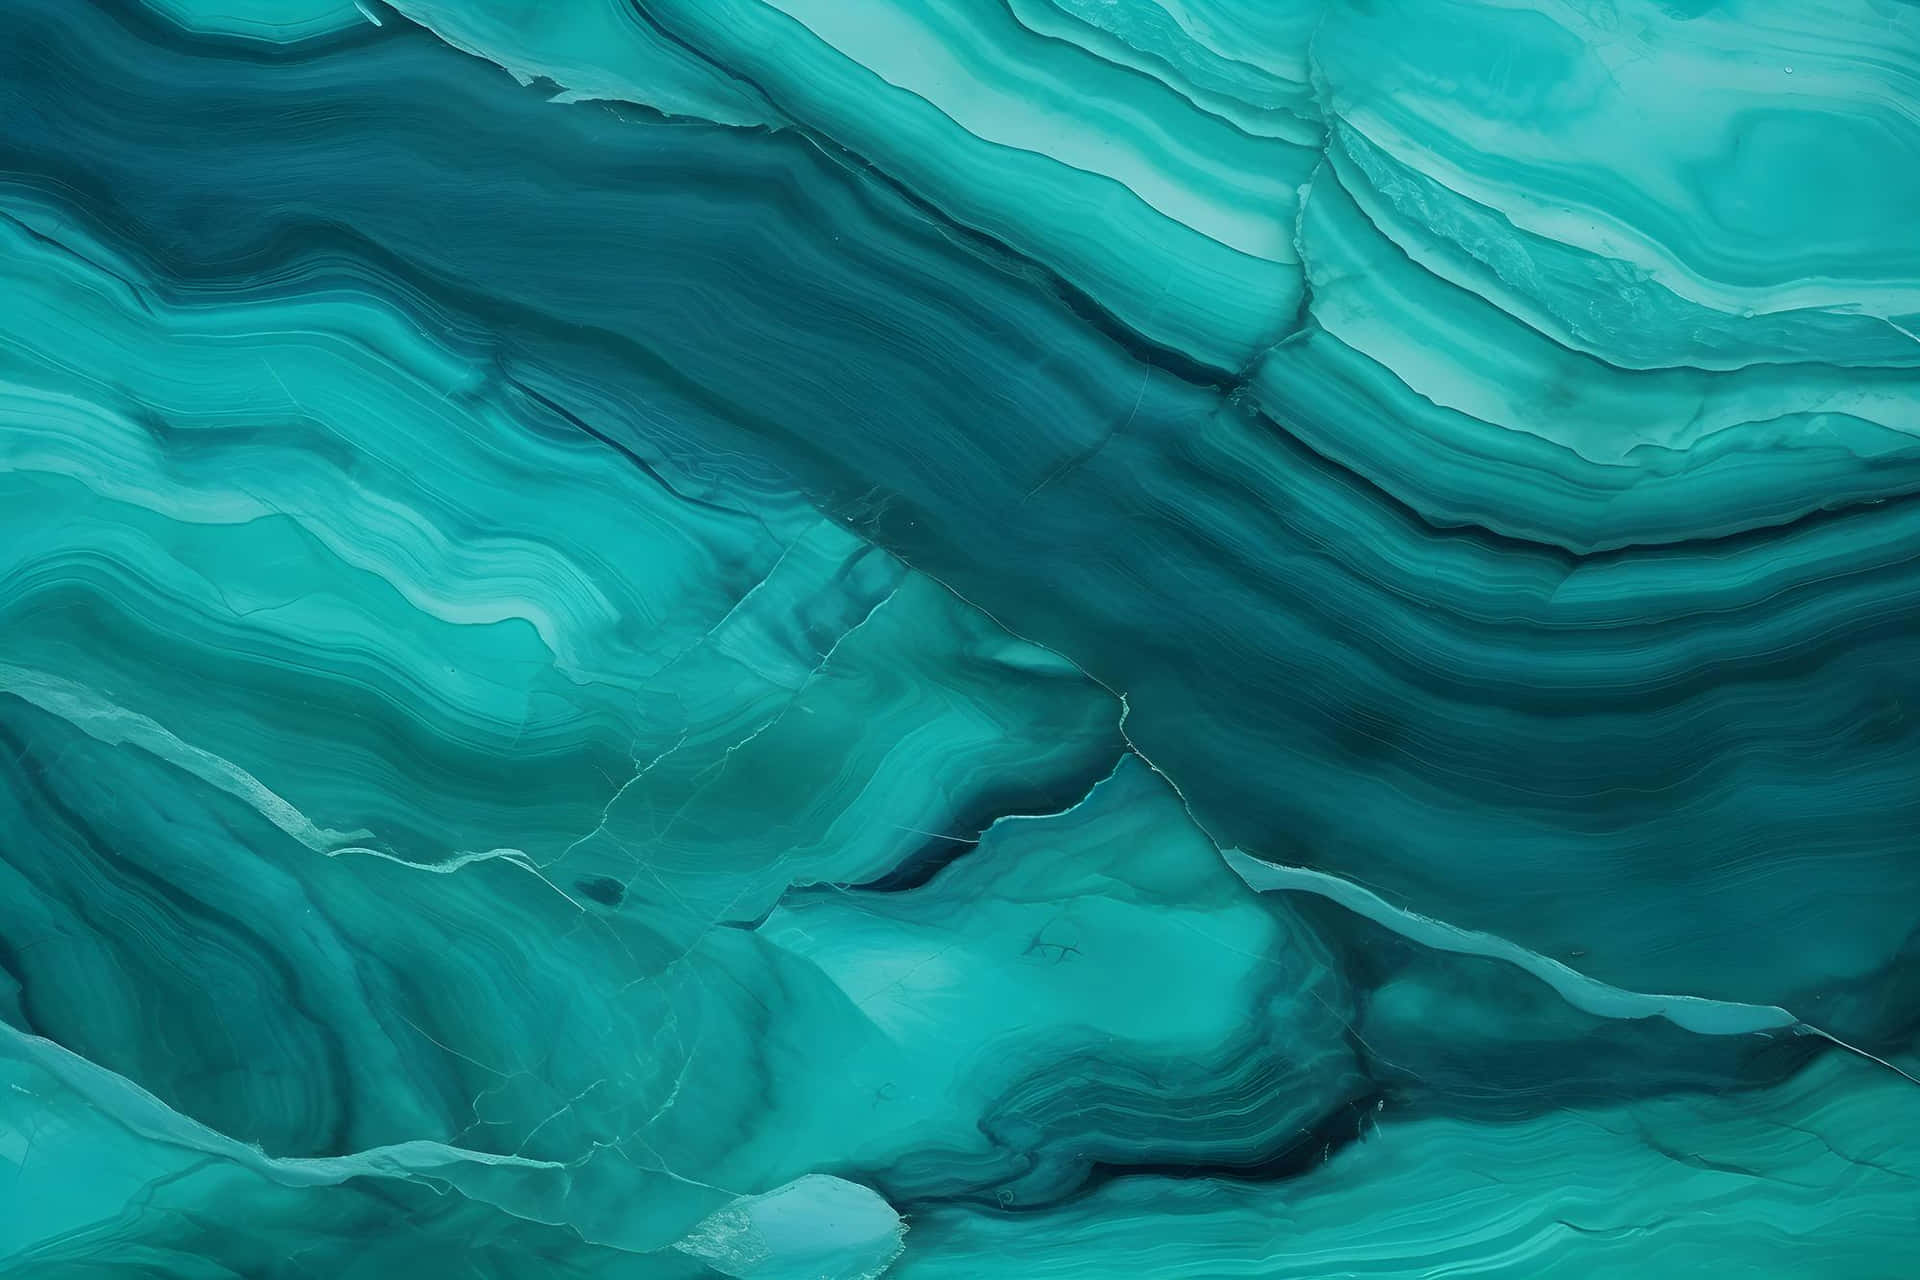 Turquoise Jade Layers Texture Wallpaper